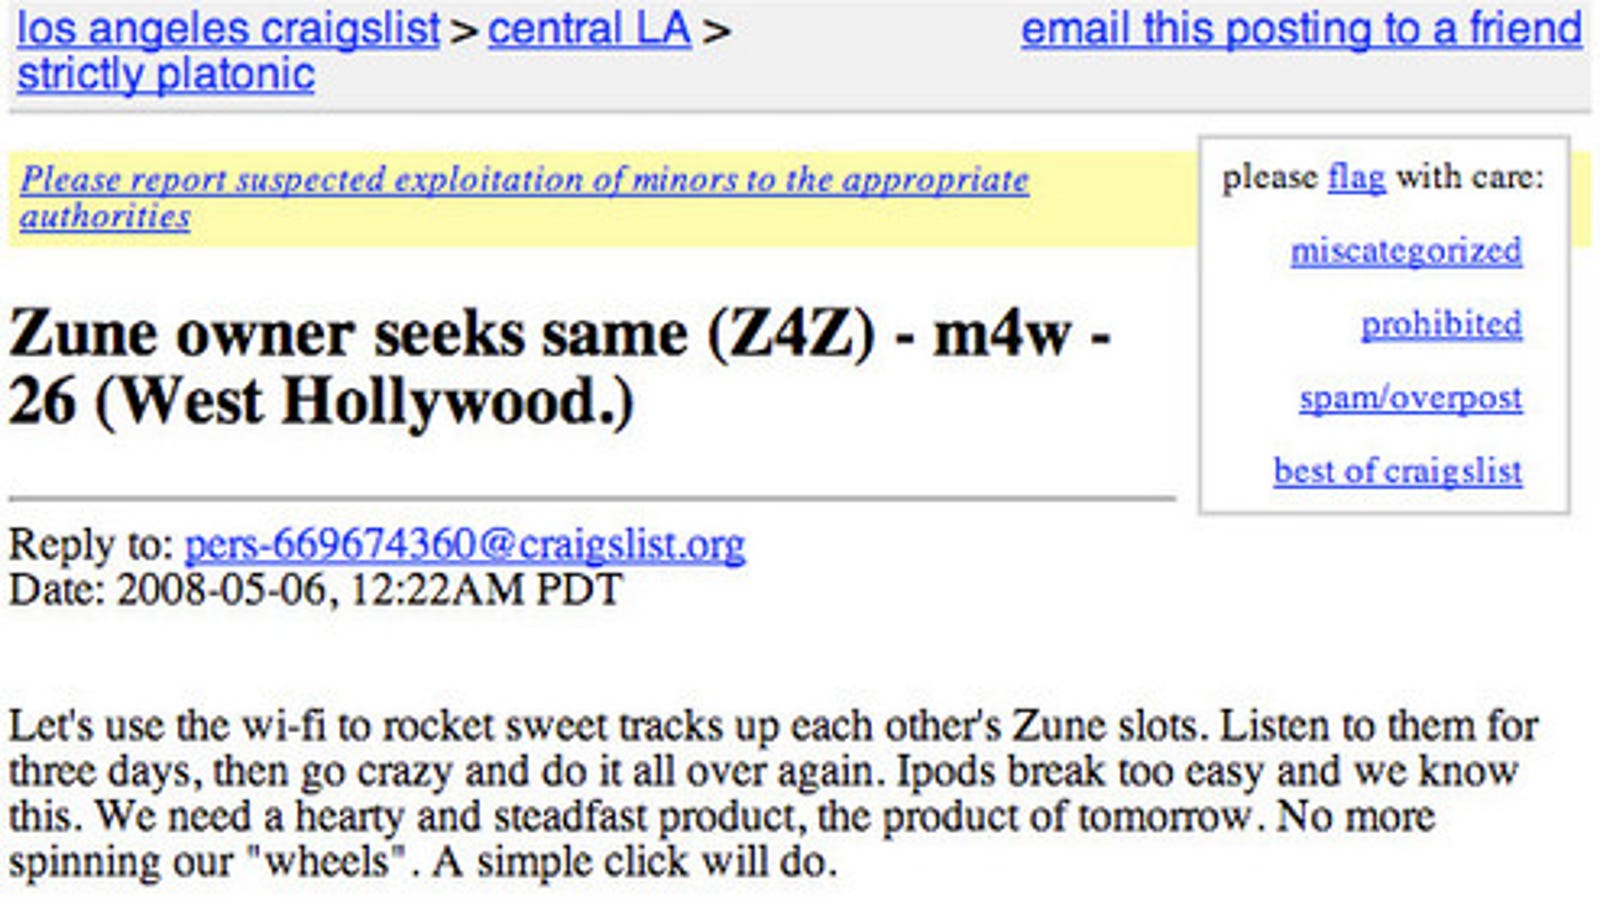 Zune Owner Uses Craigslist For Love Connection - 